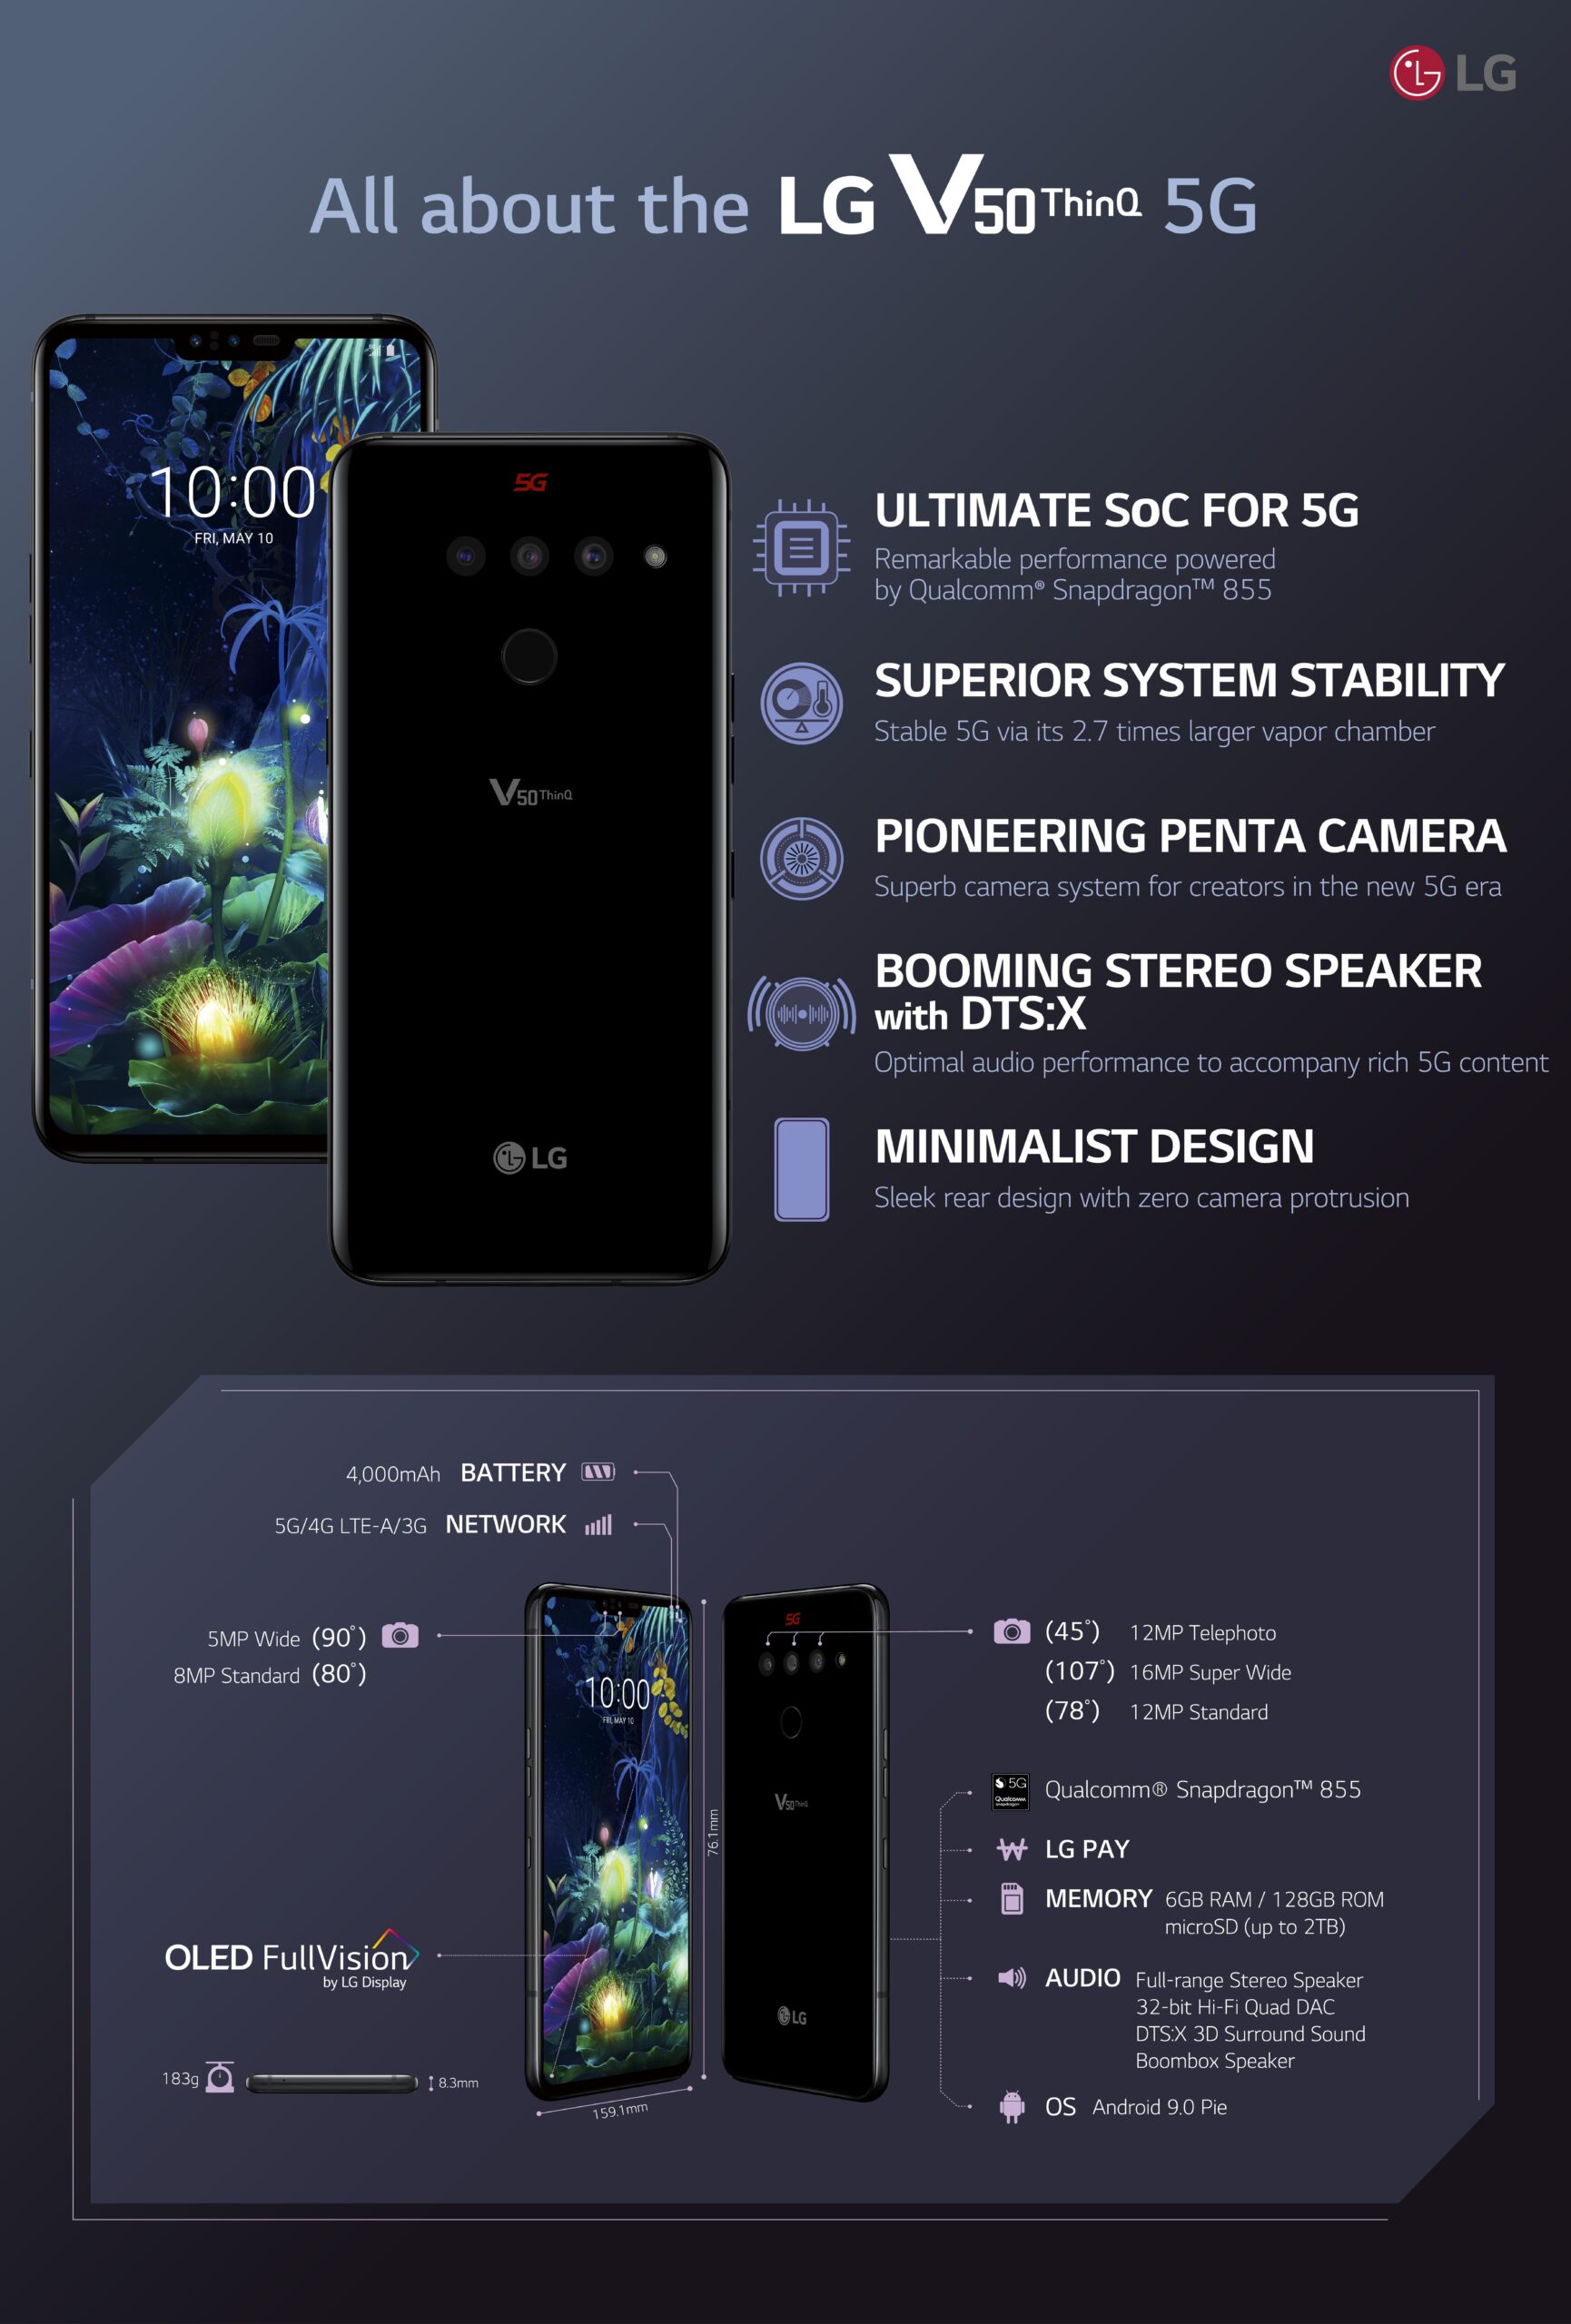 This infographic titled, “All about the LG V50 ThinQ 5G,” introduces the key benefits and specs of the smartphone including its 5G compatibility, stable system operation, Penta camera, DTS:X-enabled speaker and minimalist design.